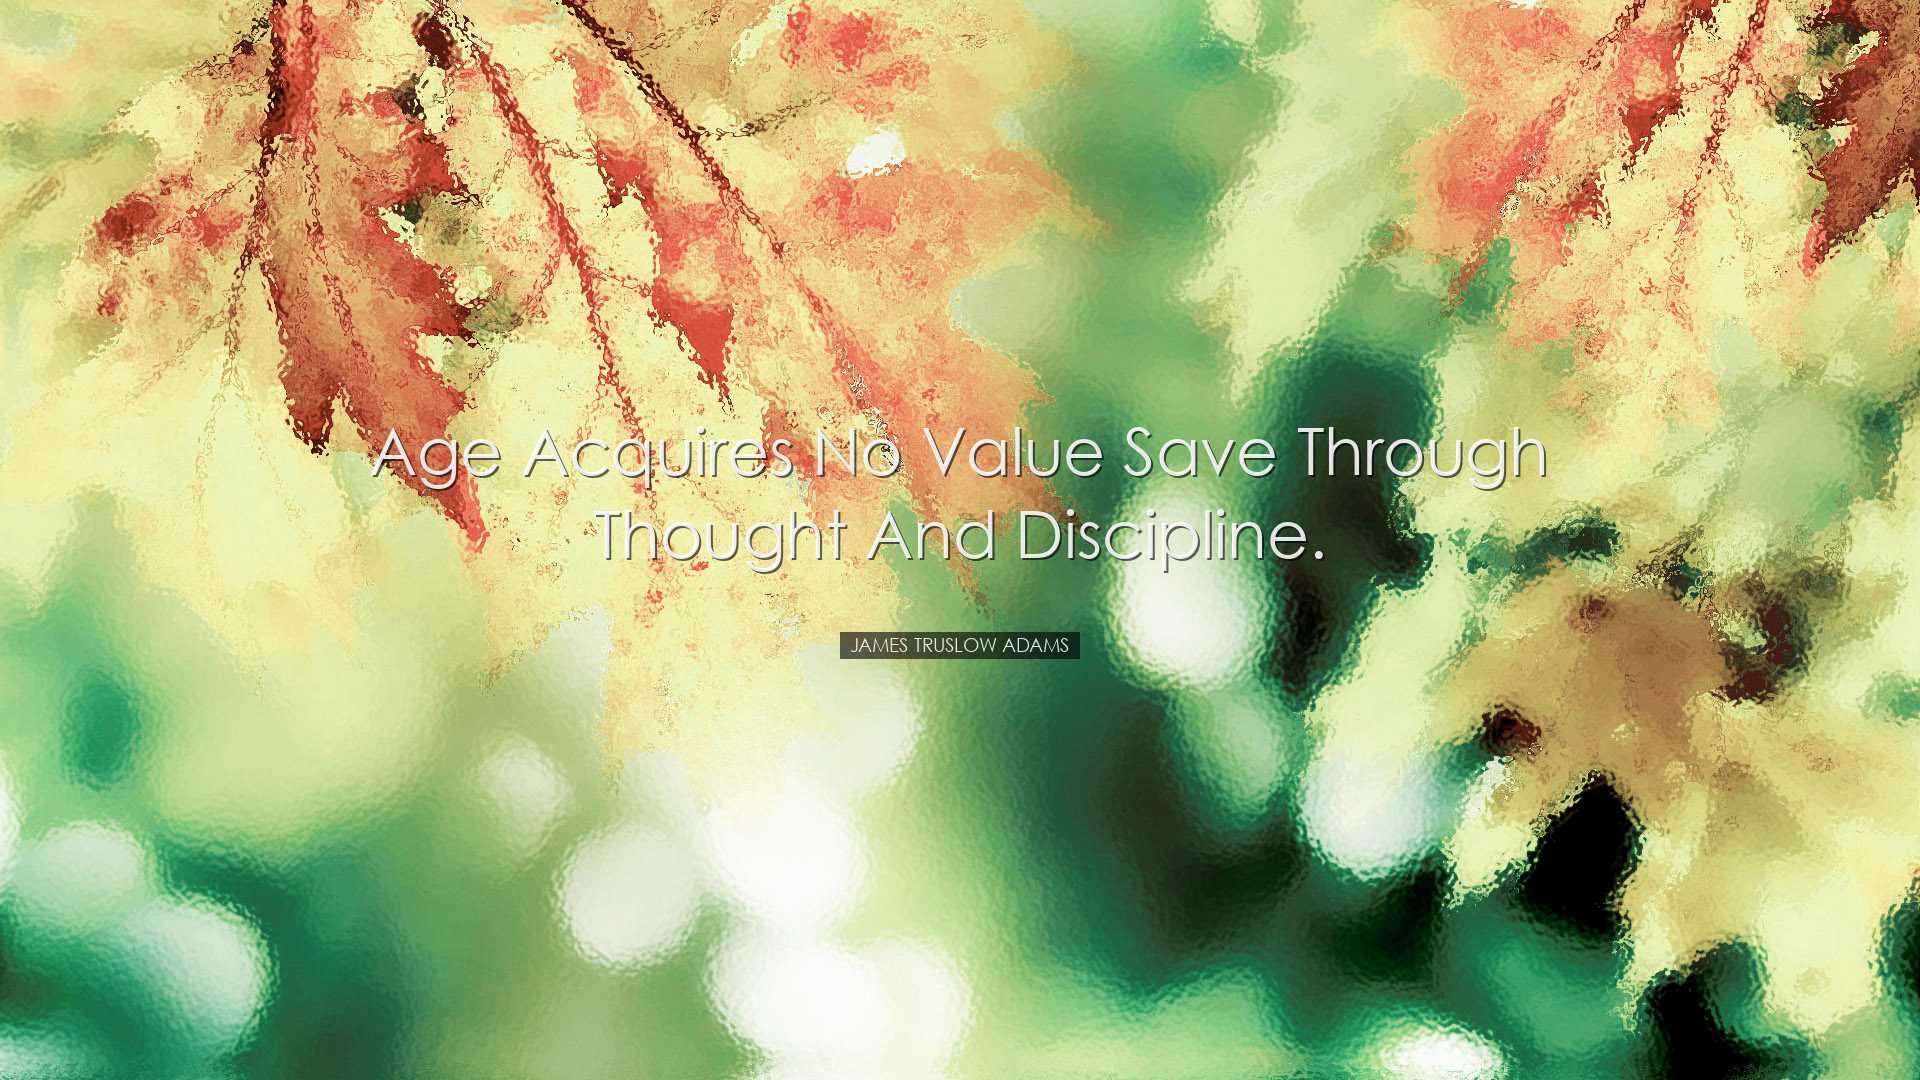 Age acquires no value save through thought and discipline. - James